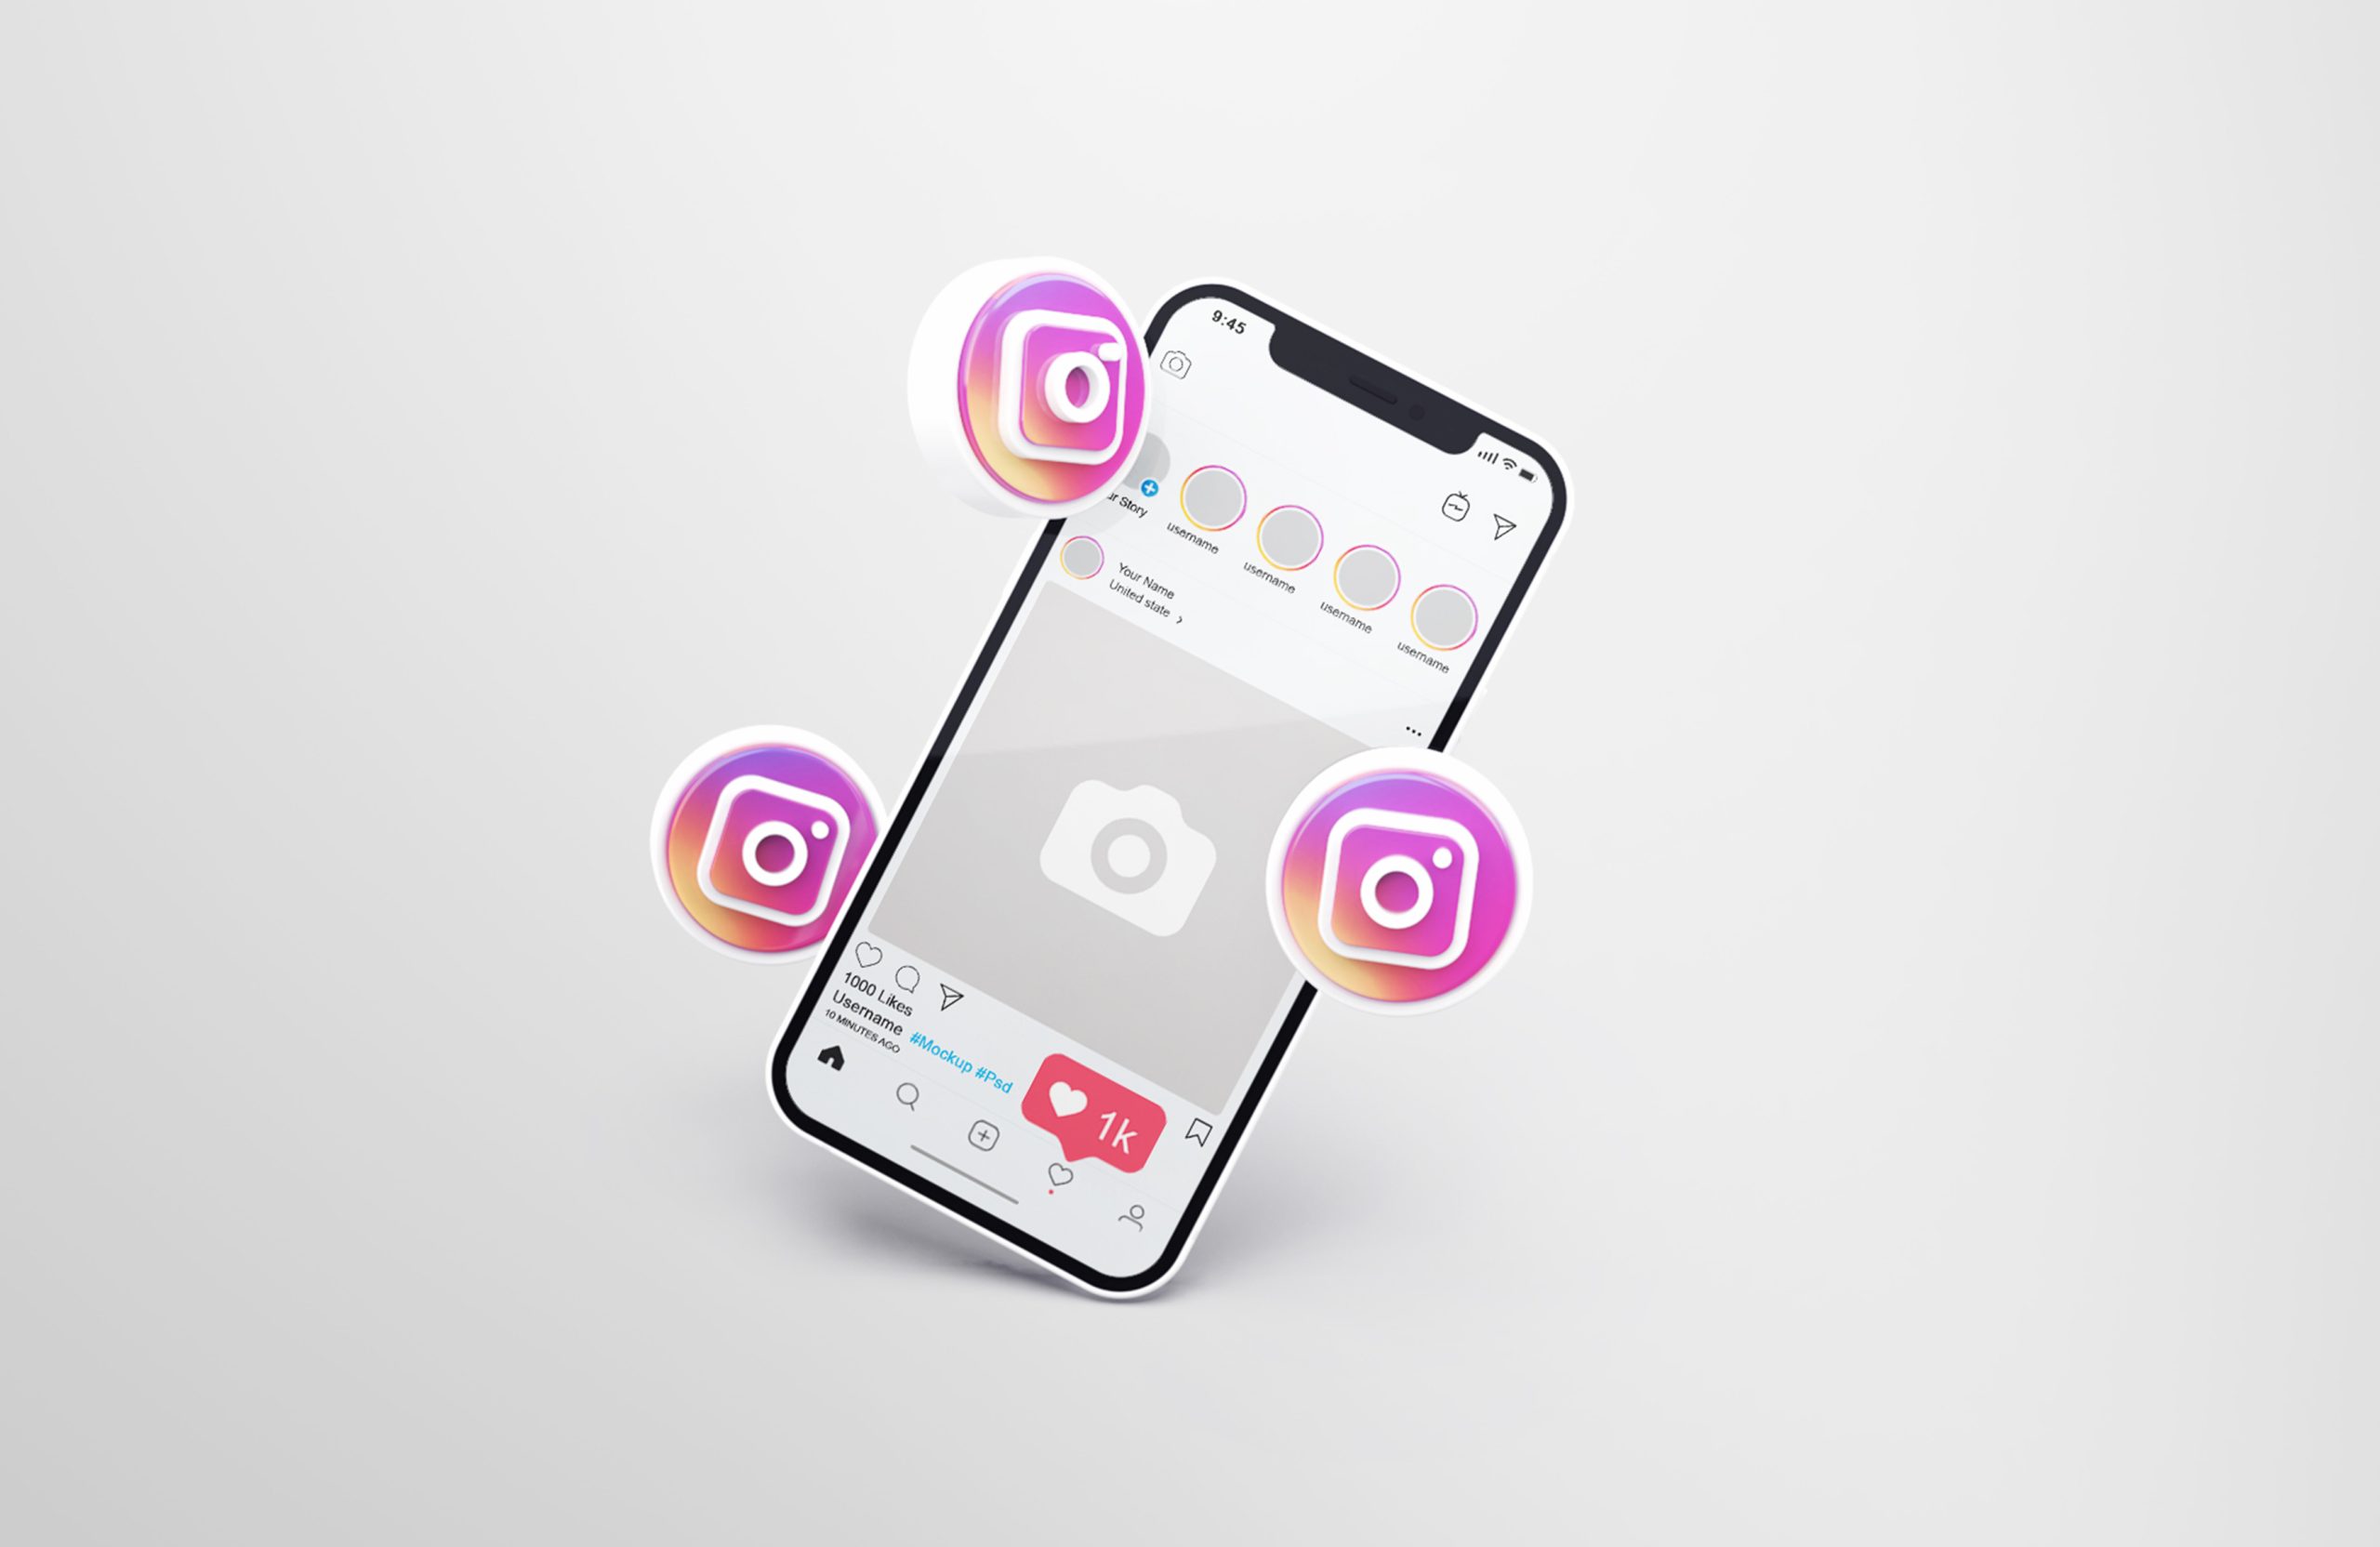 How to set up do Instagram ad?